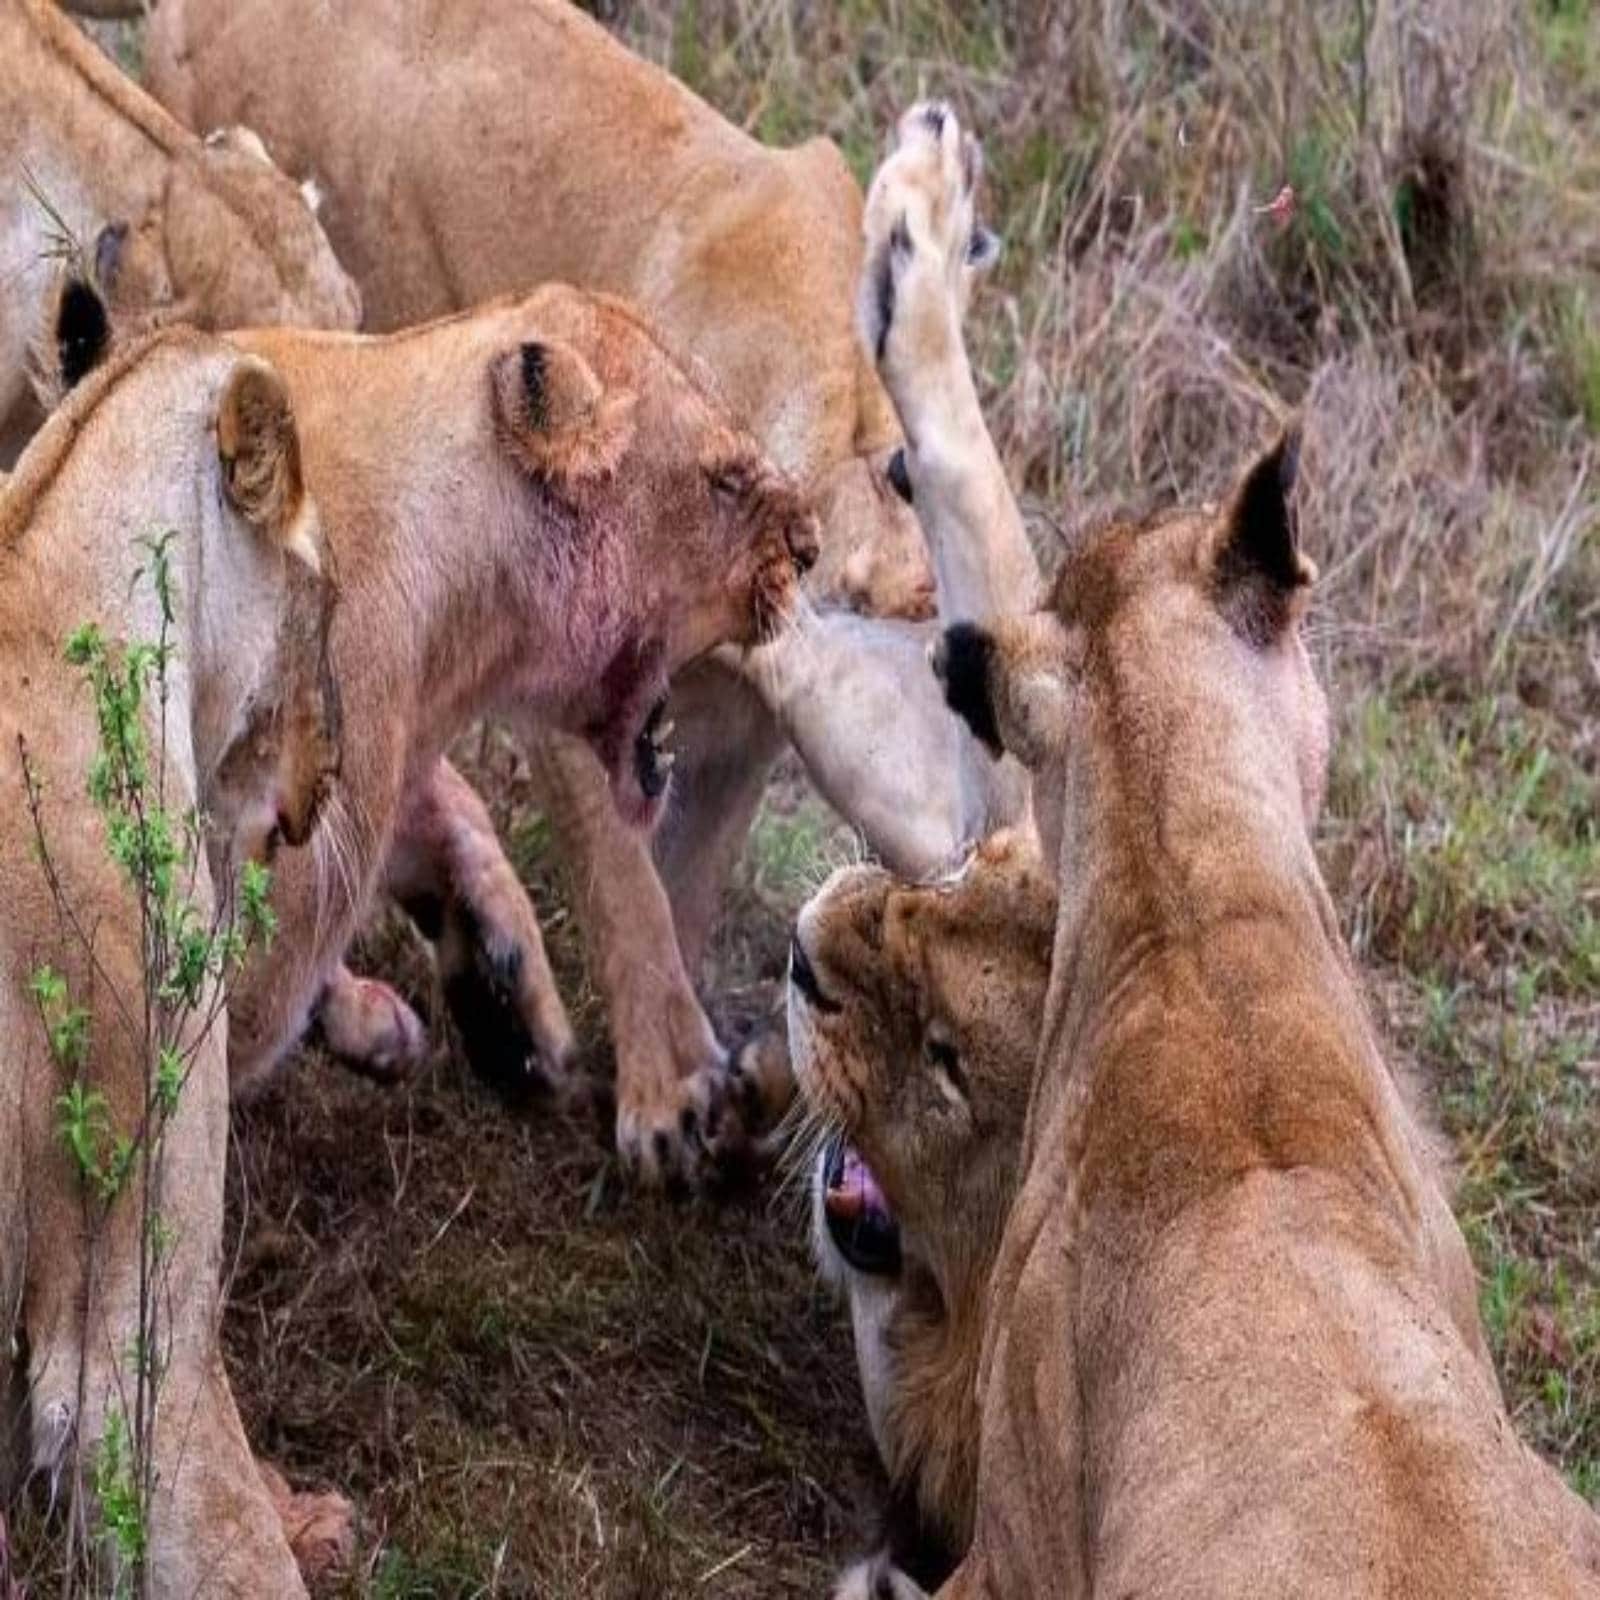 Wildlife, Wildlife Pictures,Testicle, Lion Testicle, Lion loses Testicle, Lion lionesses fight, lionesses attack Lion, Lion steal Cubs, steal food, Bloody Battle, Lion Bloody Battle, Lion news, Lion photos